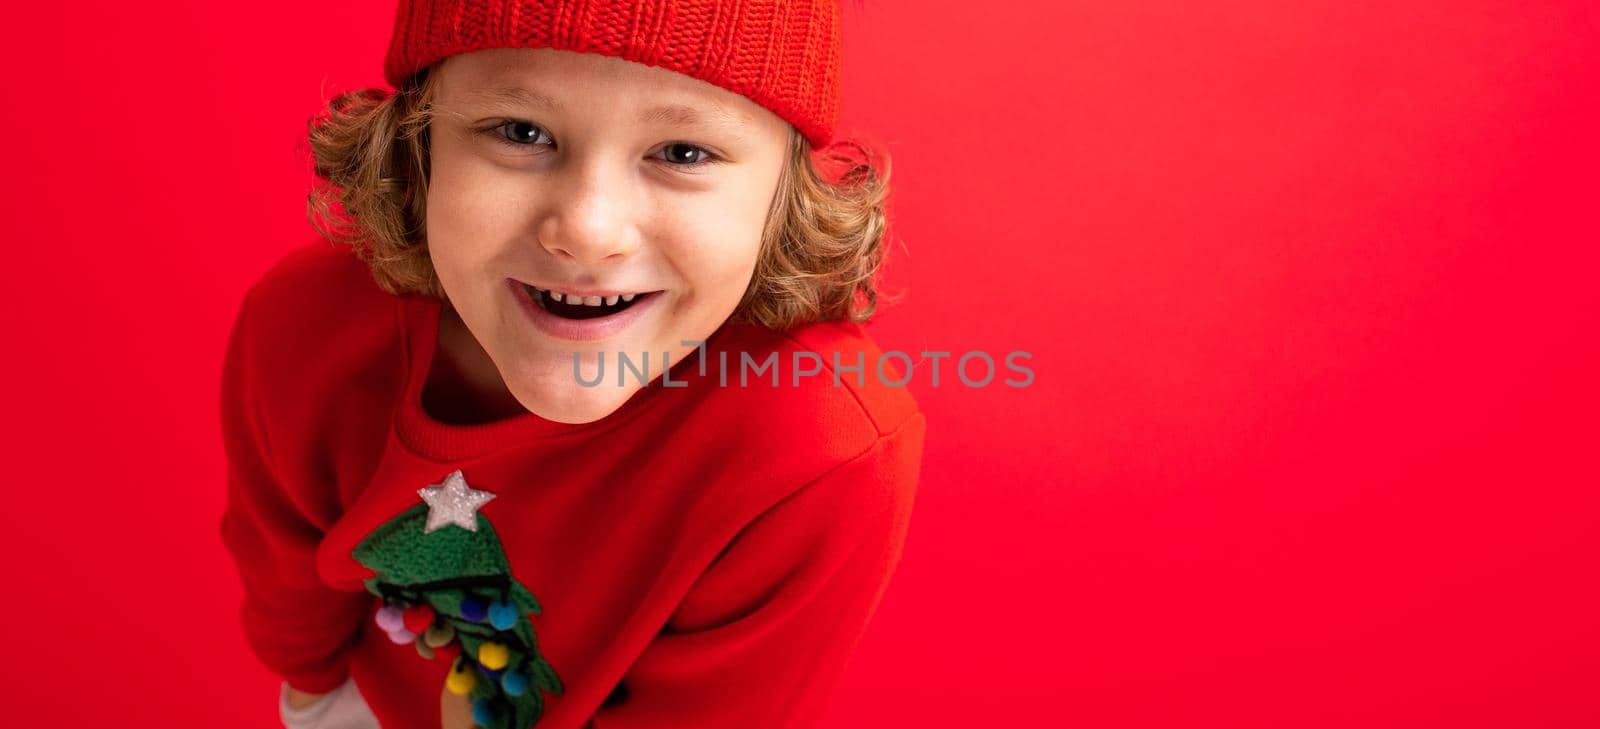 cool blond kid in warm hat and sweater with christmas tree on red background fooling around, christmas concept.